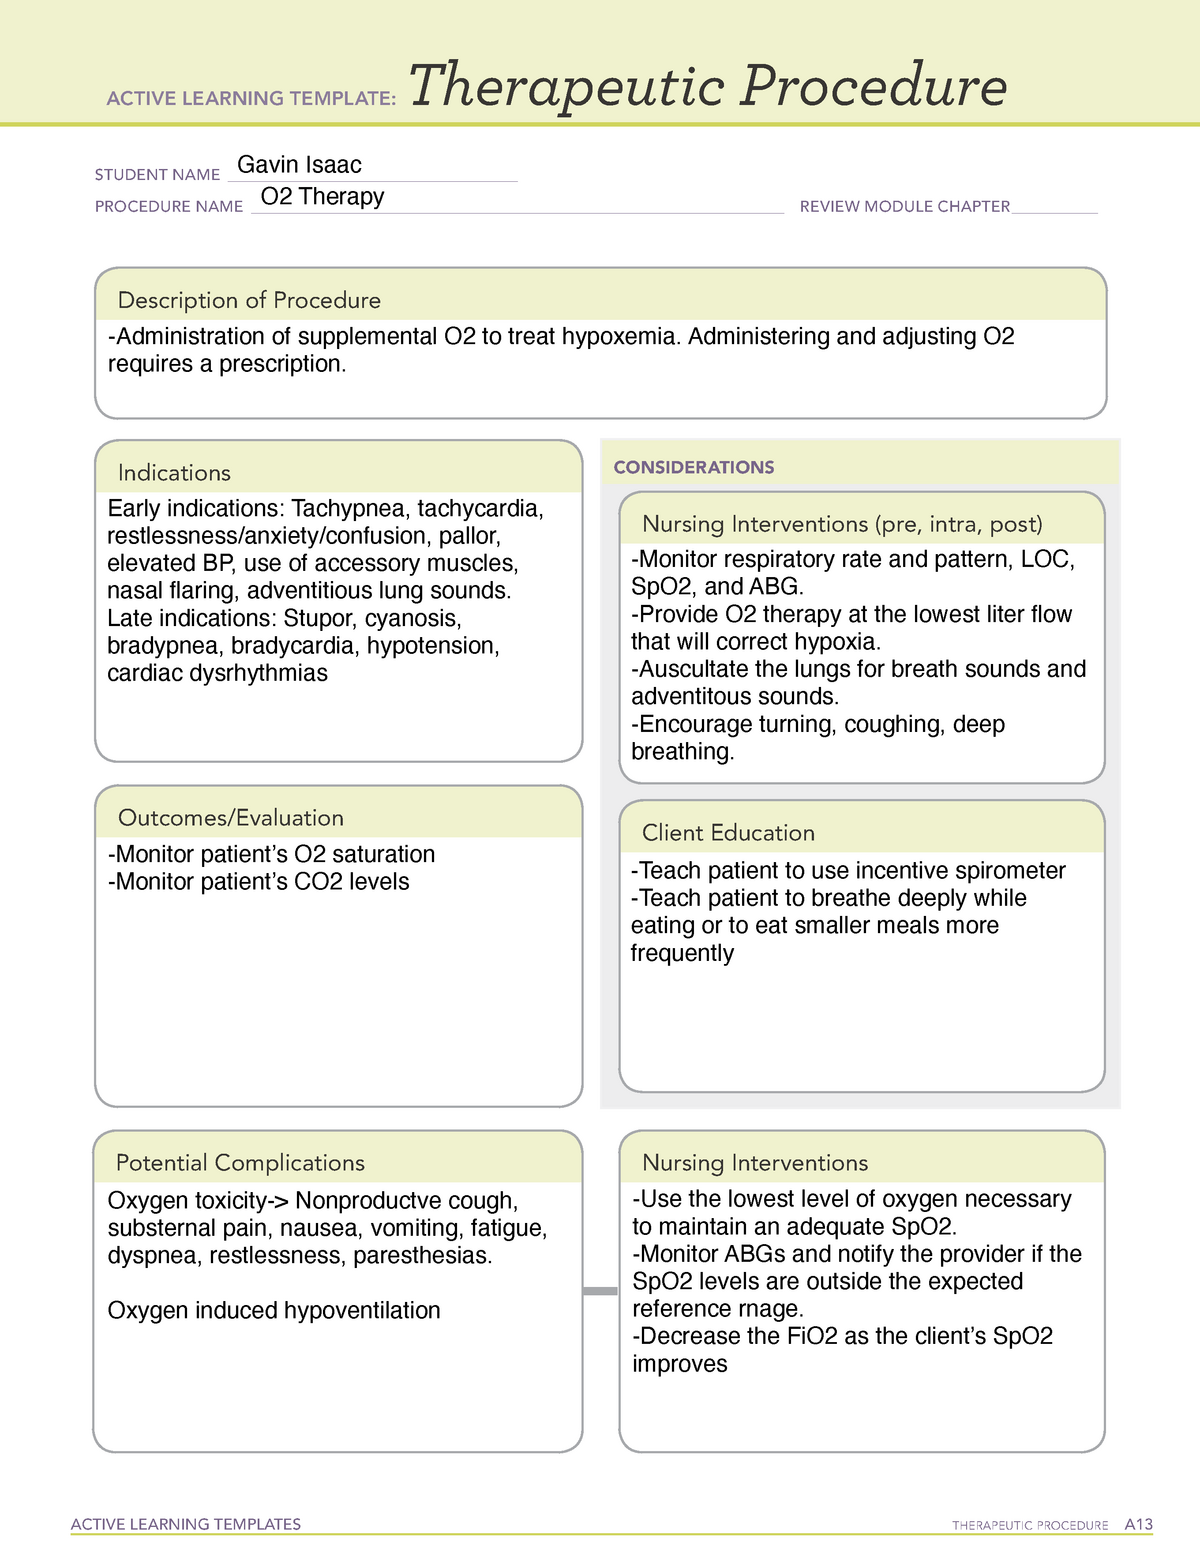 Therapy O2 Active Learning Template ACTIVE LEARNING TEMPLATES